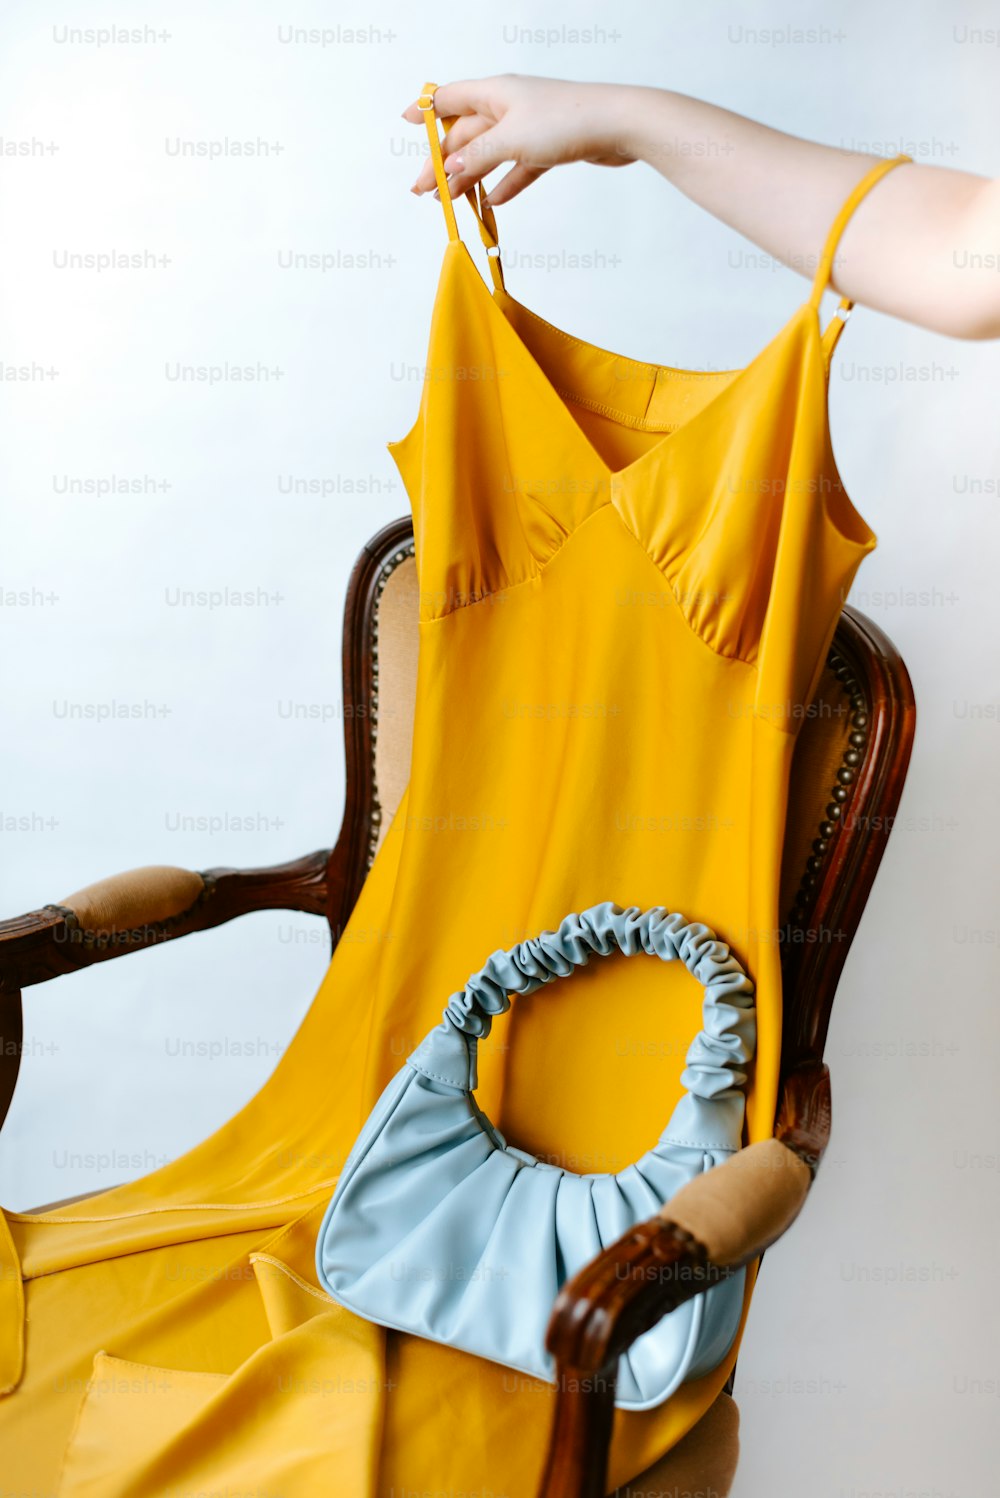 a woman is holding a yellow dress on a chair